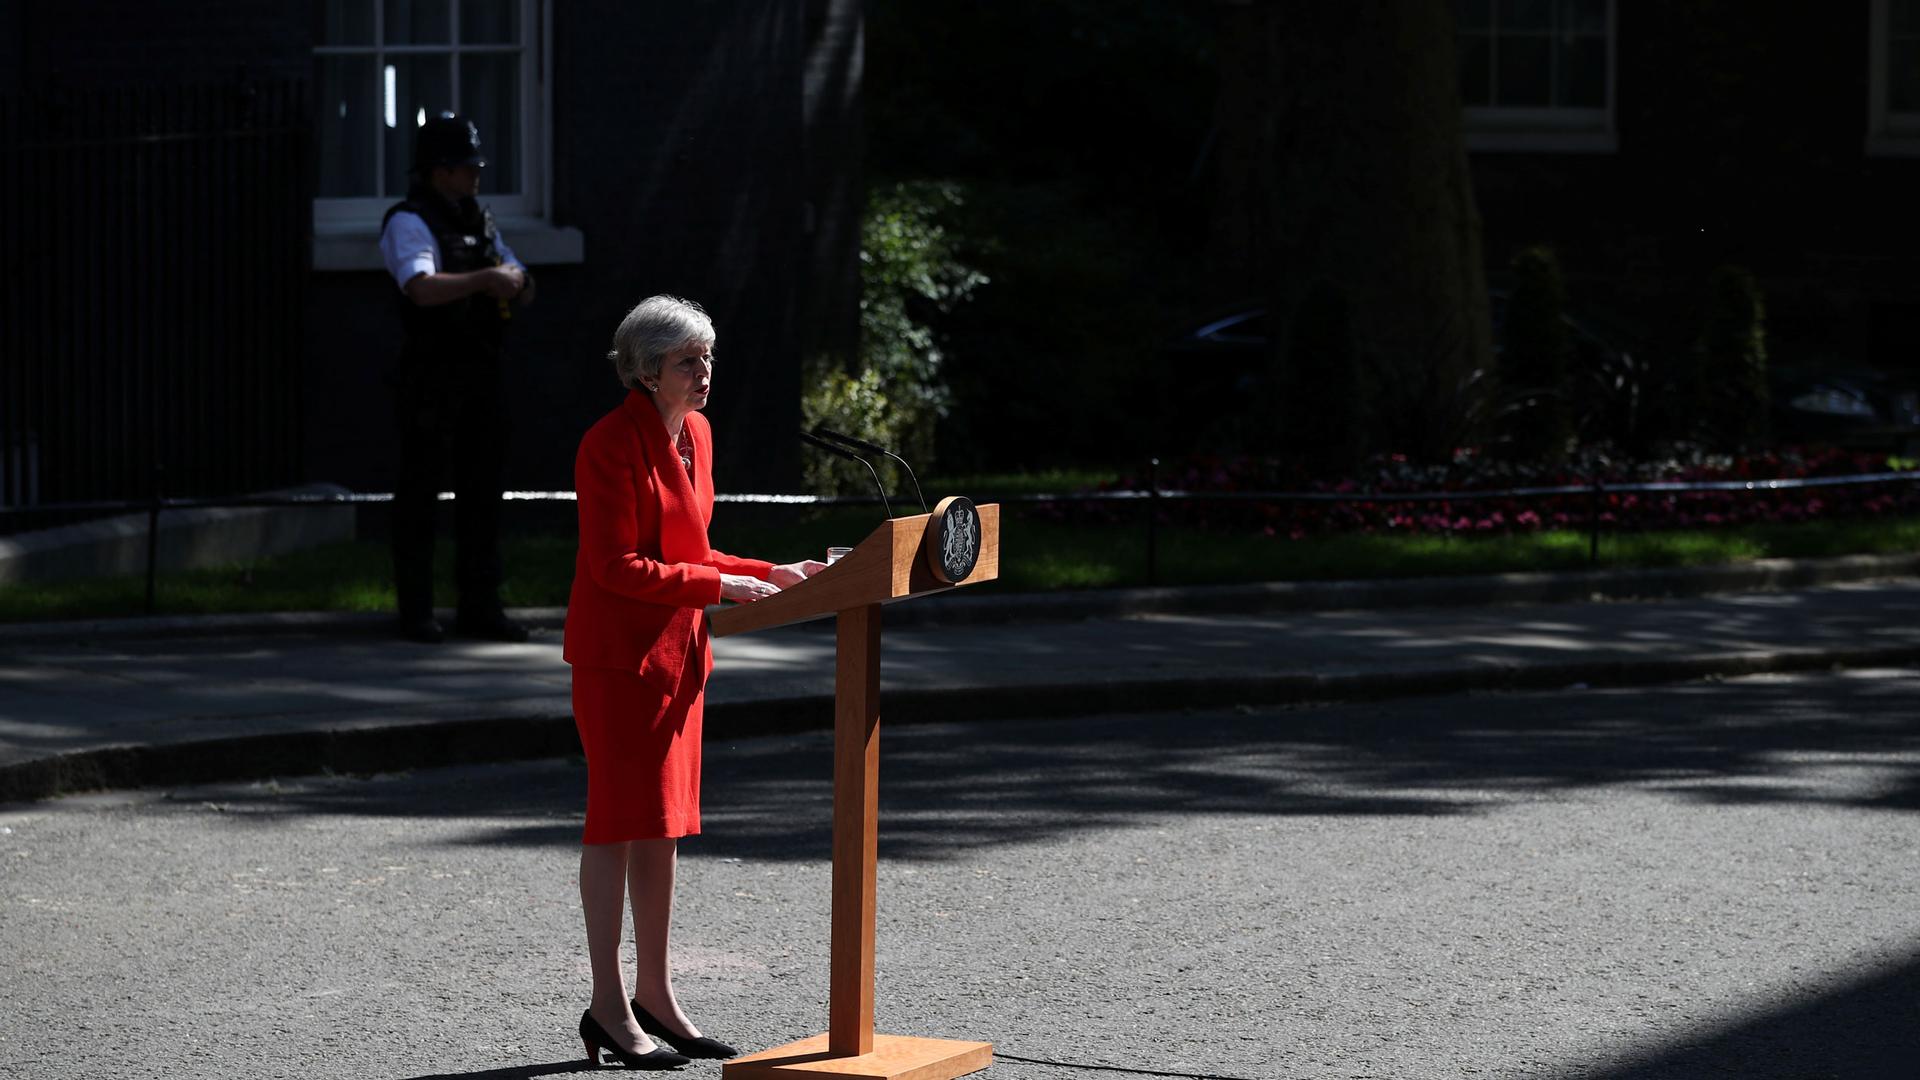 British Prime Minister Theresa May is shown standing at a wooden podium and wearing a red suit.